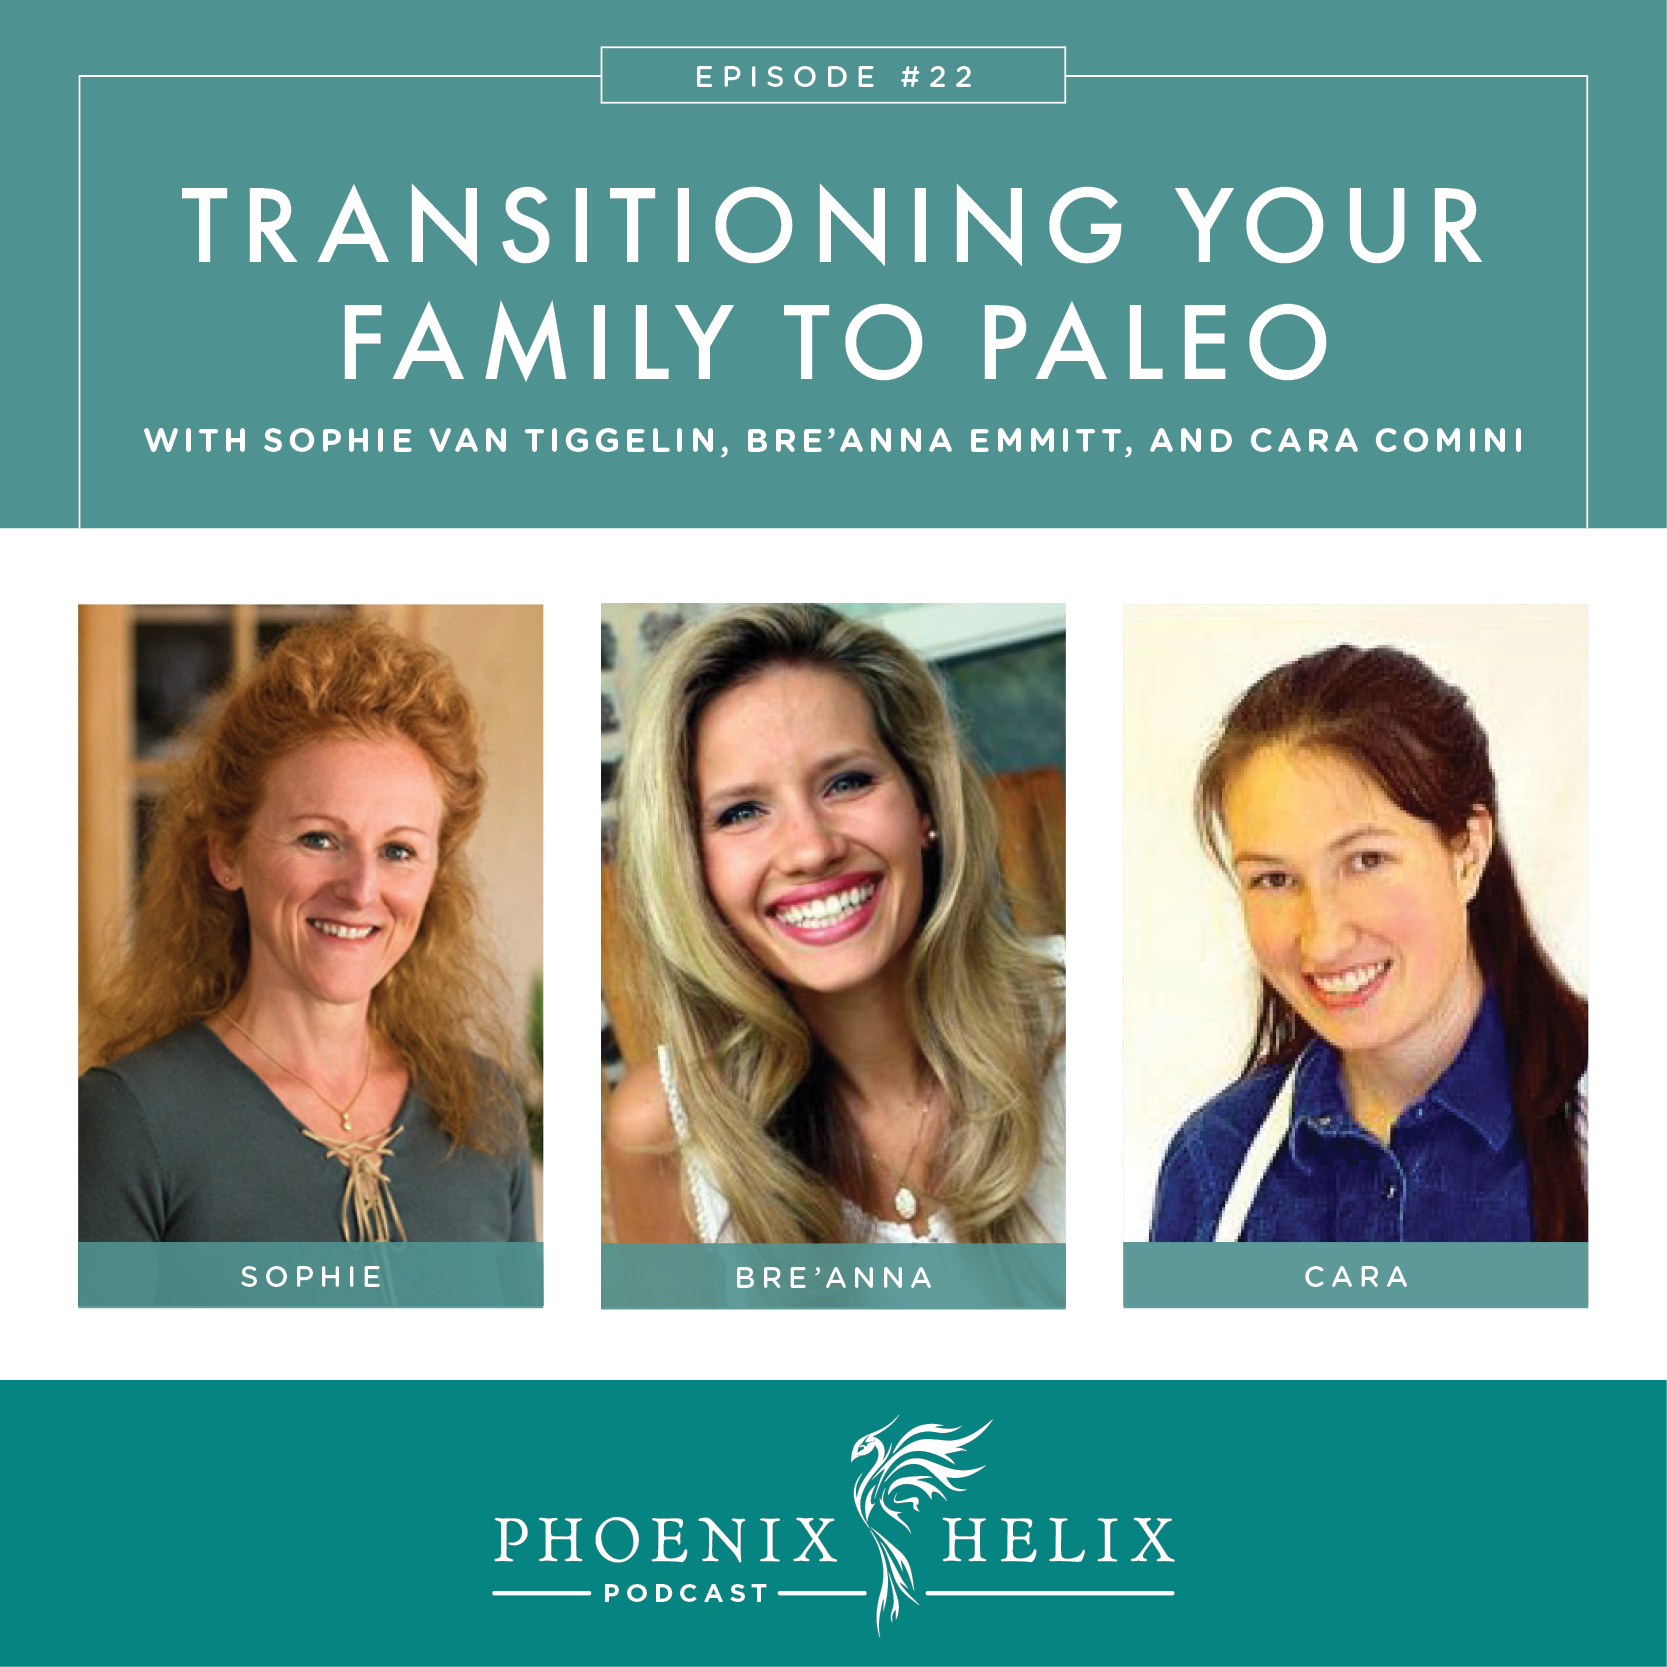 Transitioning Your Family to Paleo | Phoenix Helix Podcast